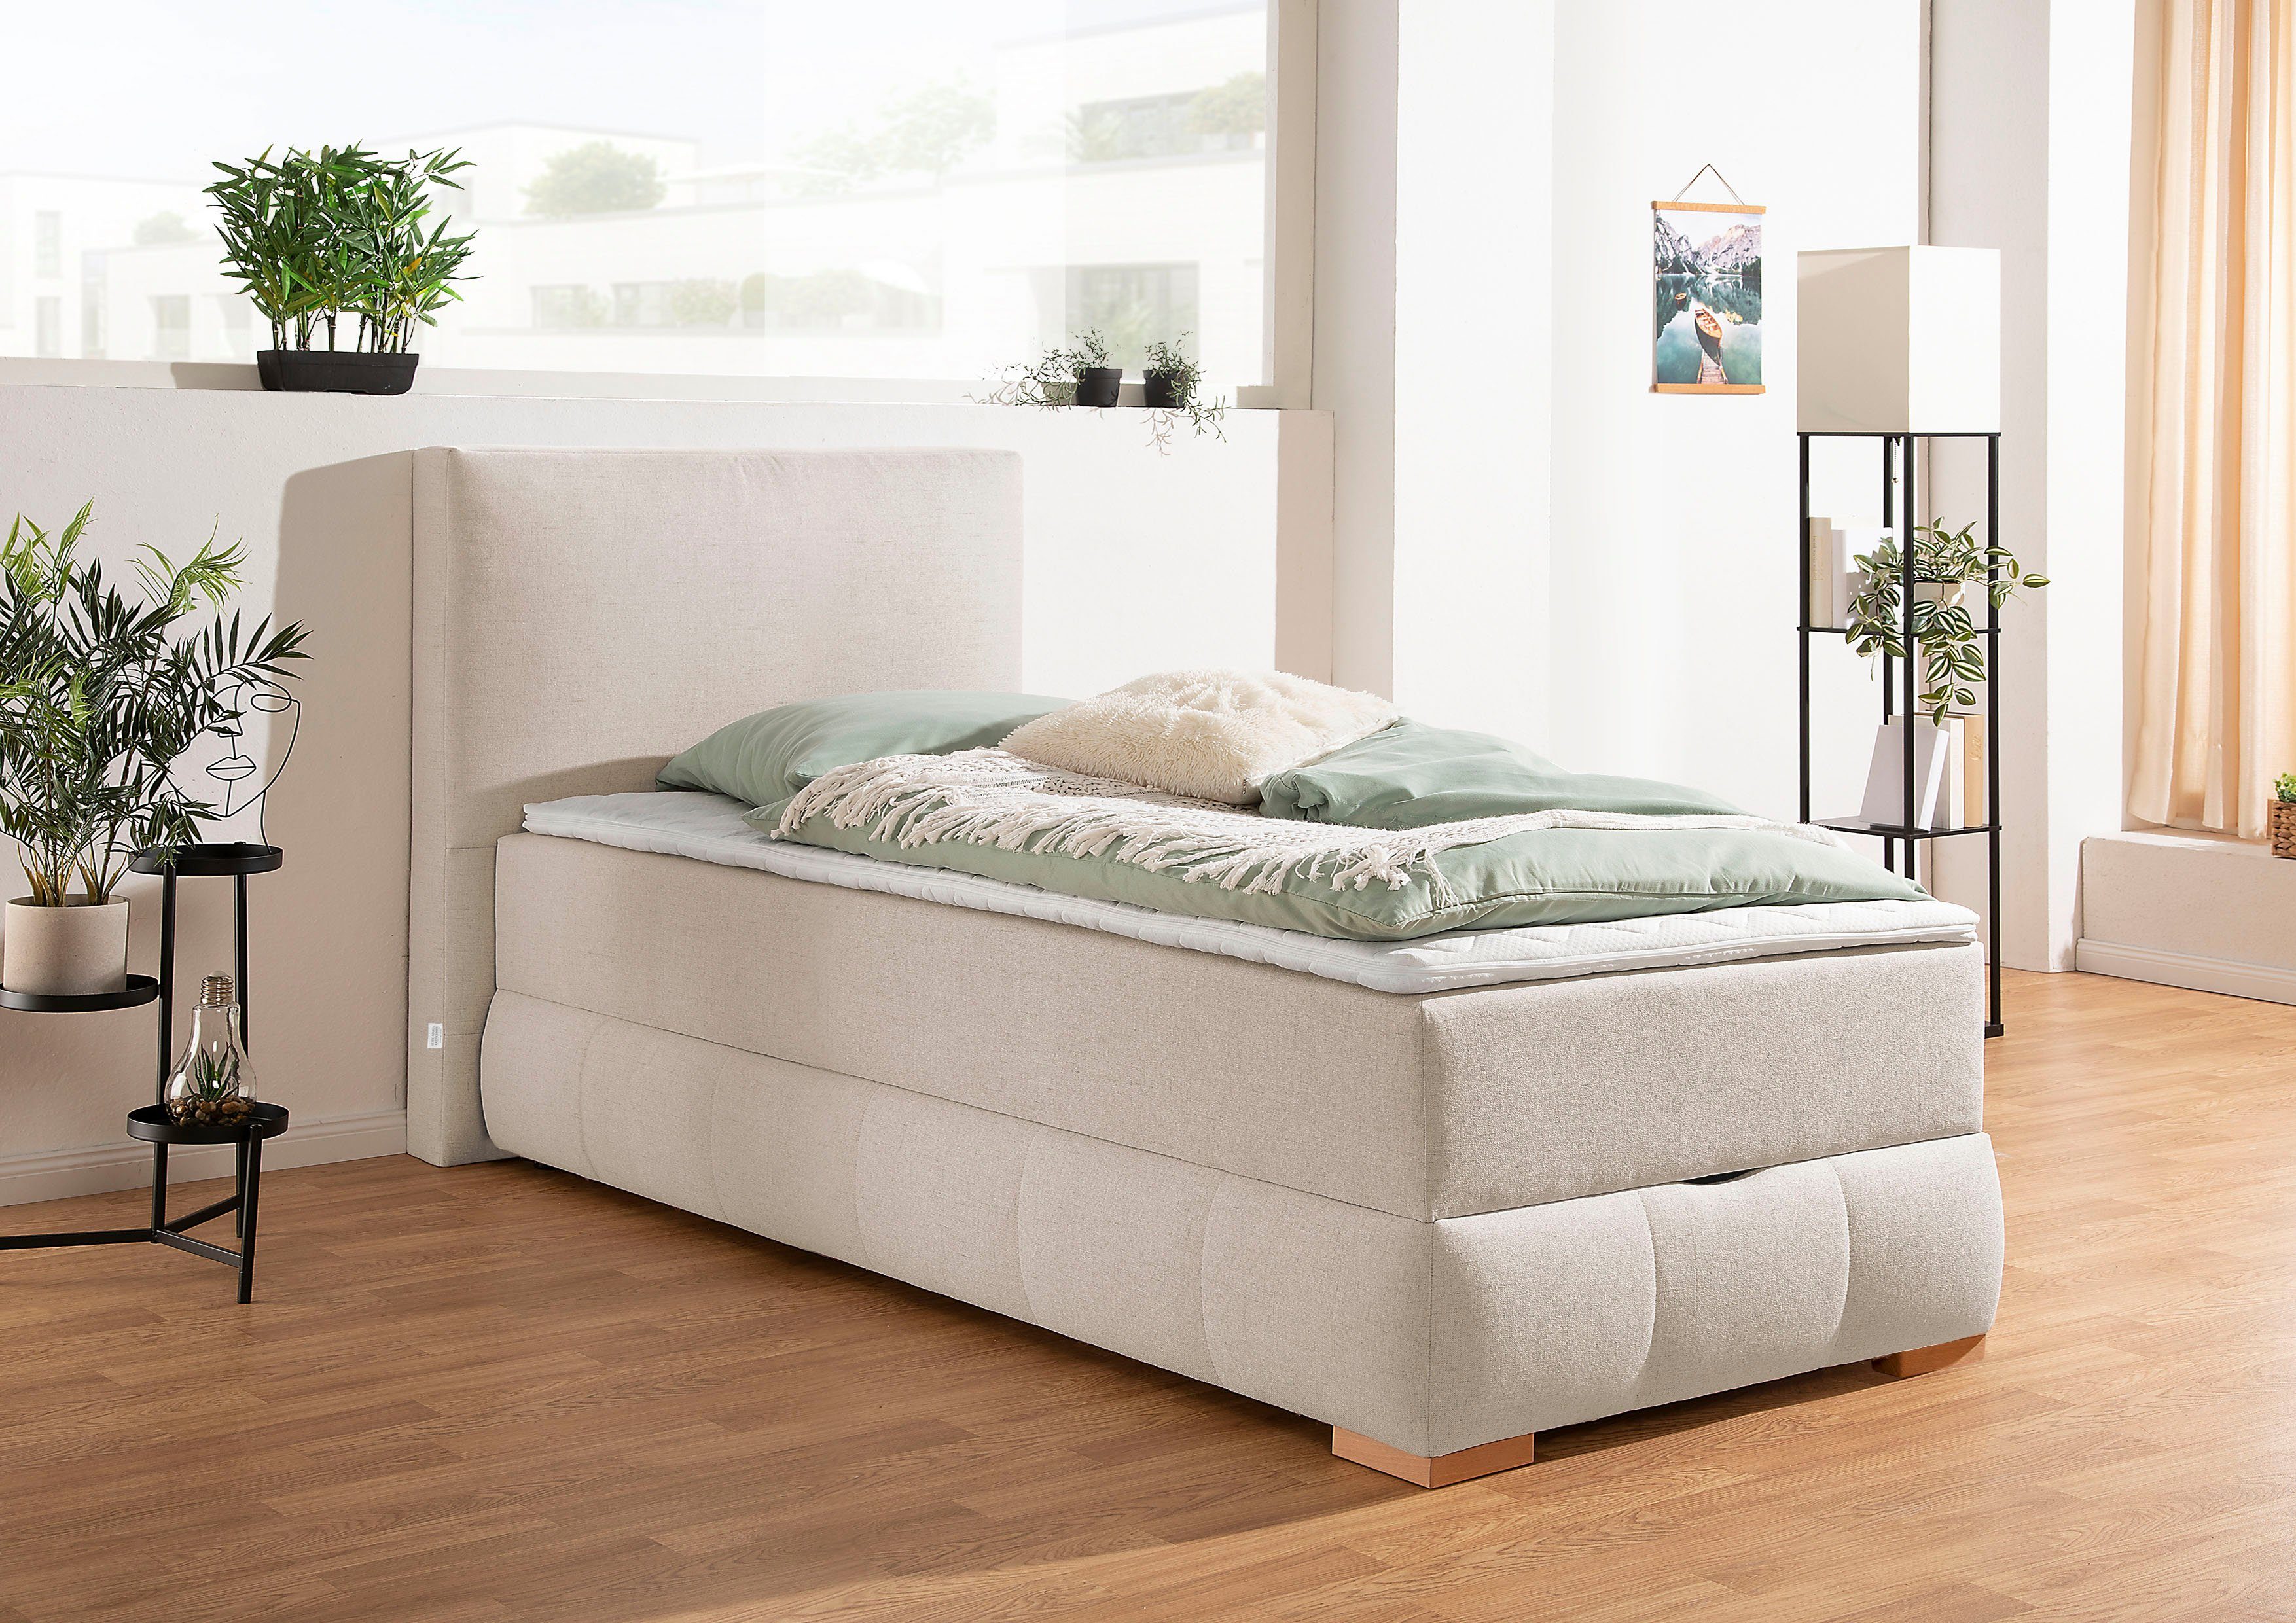 guido maria kretschmer homeliving boxspring wehma in h2  h3 ter keuze, inclusief topmatras beige